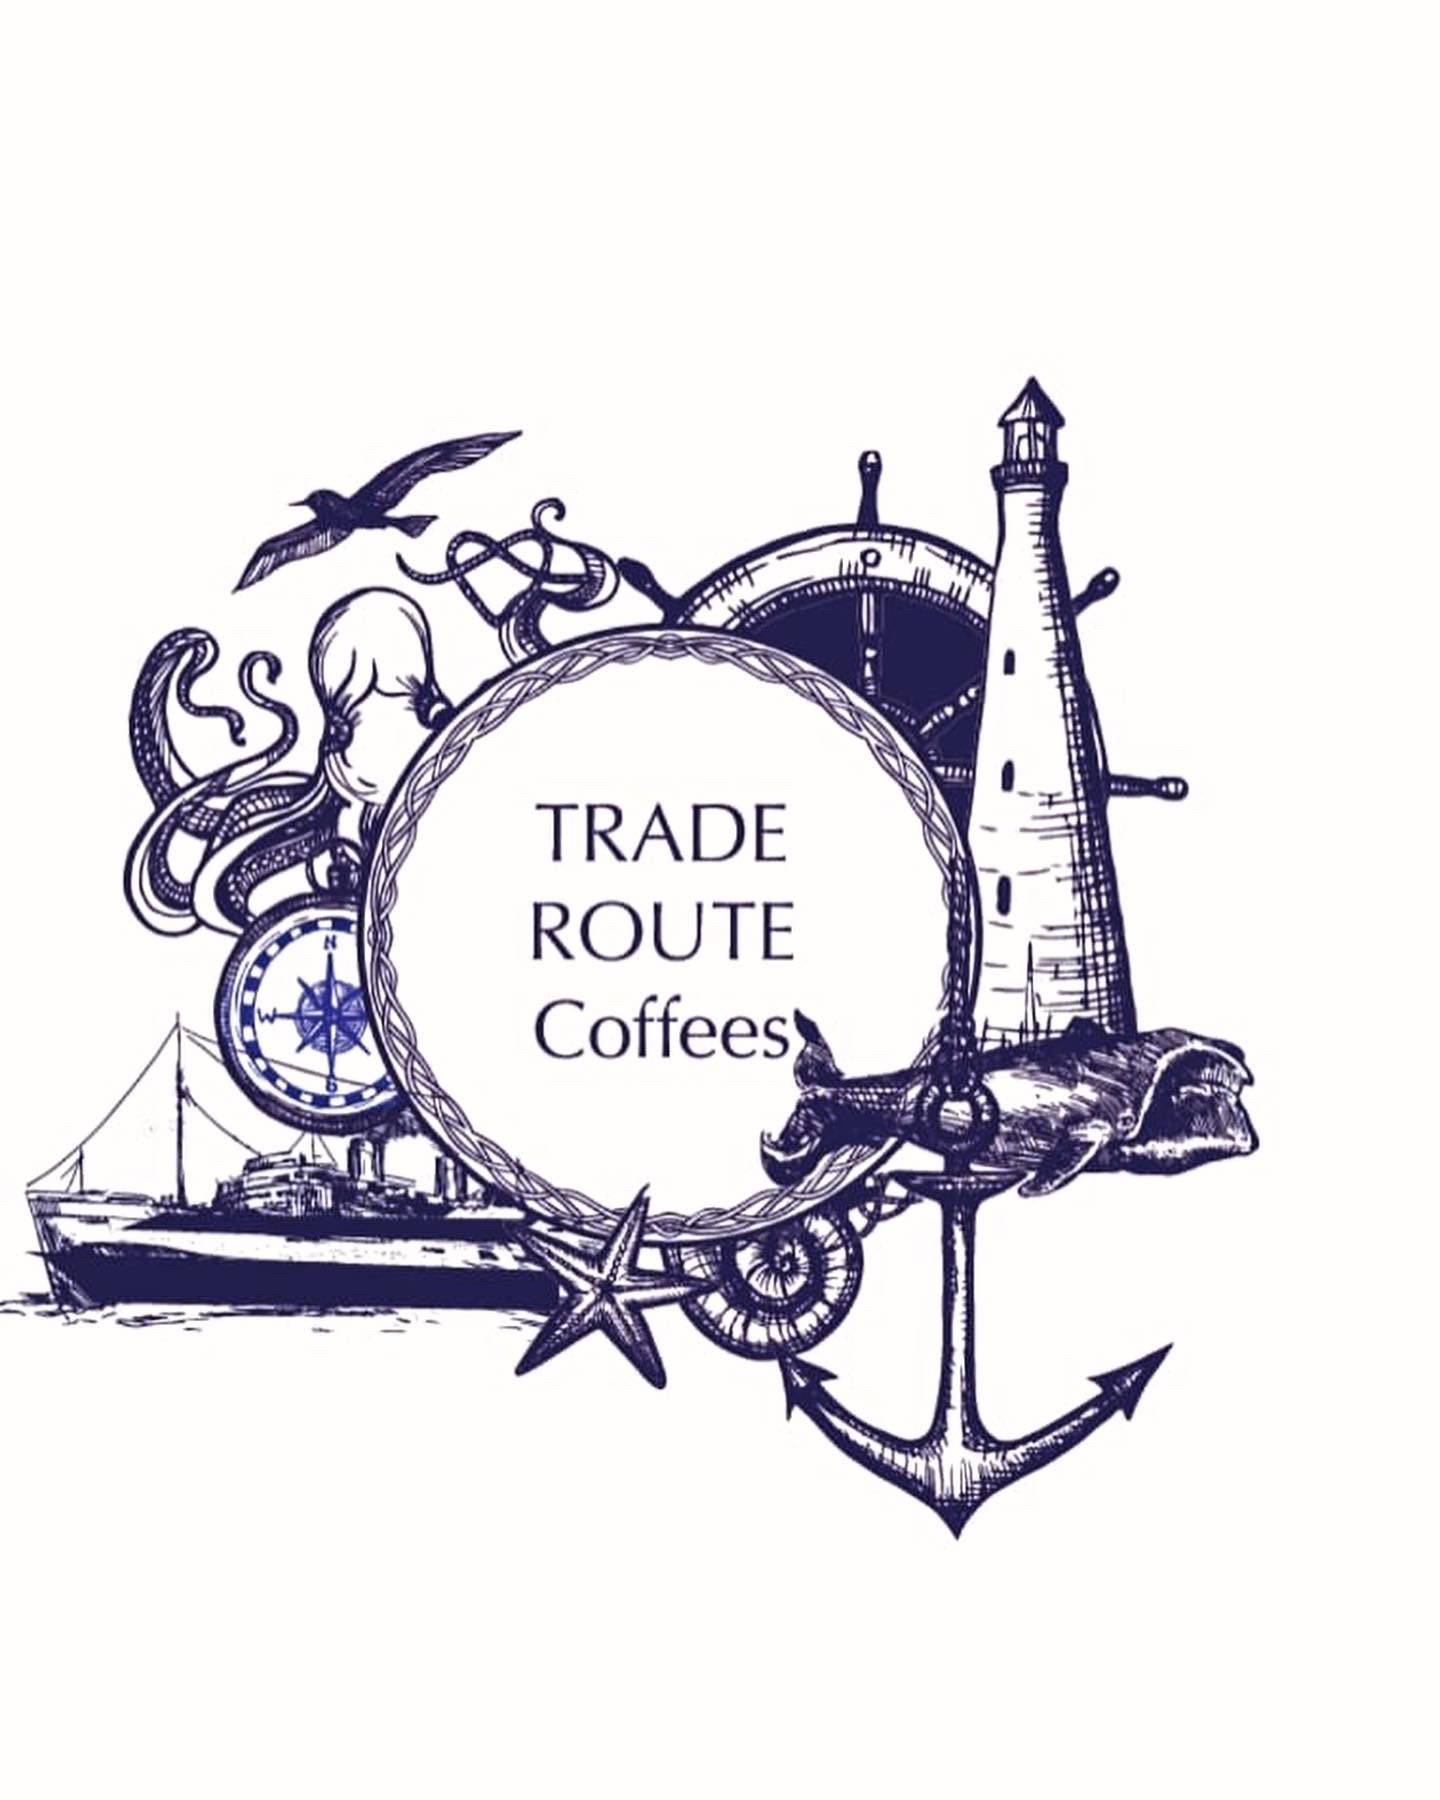 Trade Route Coffees